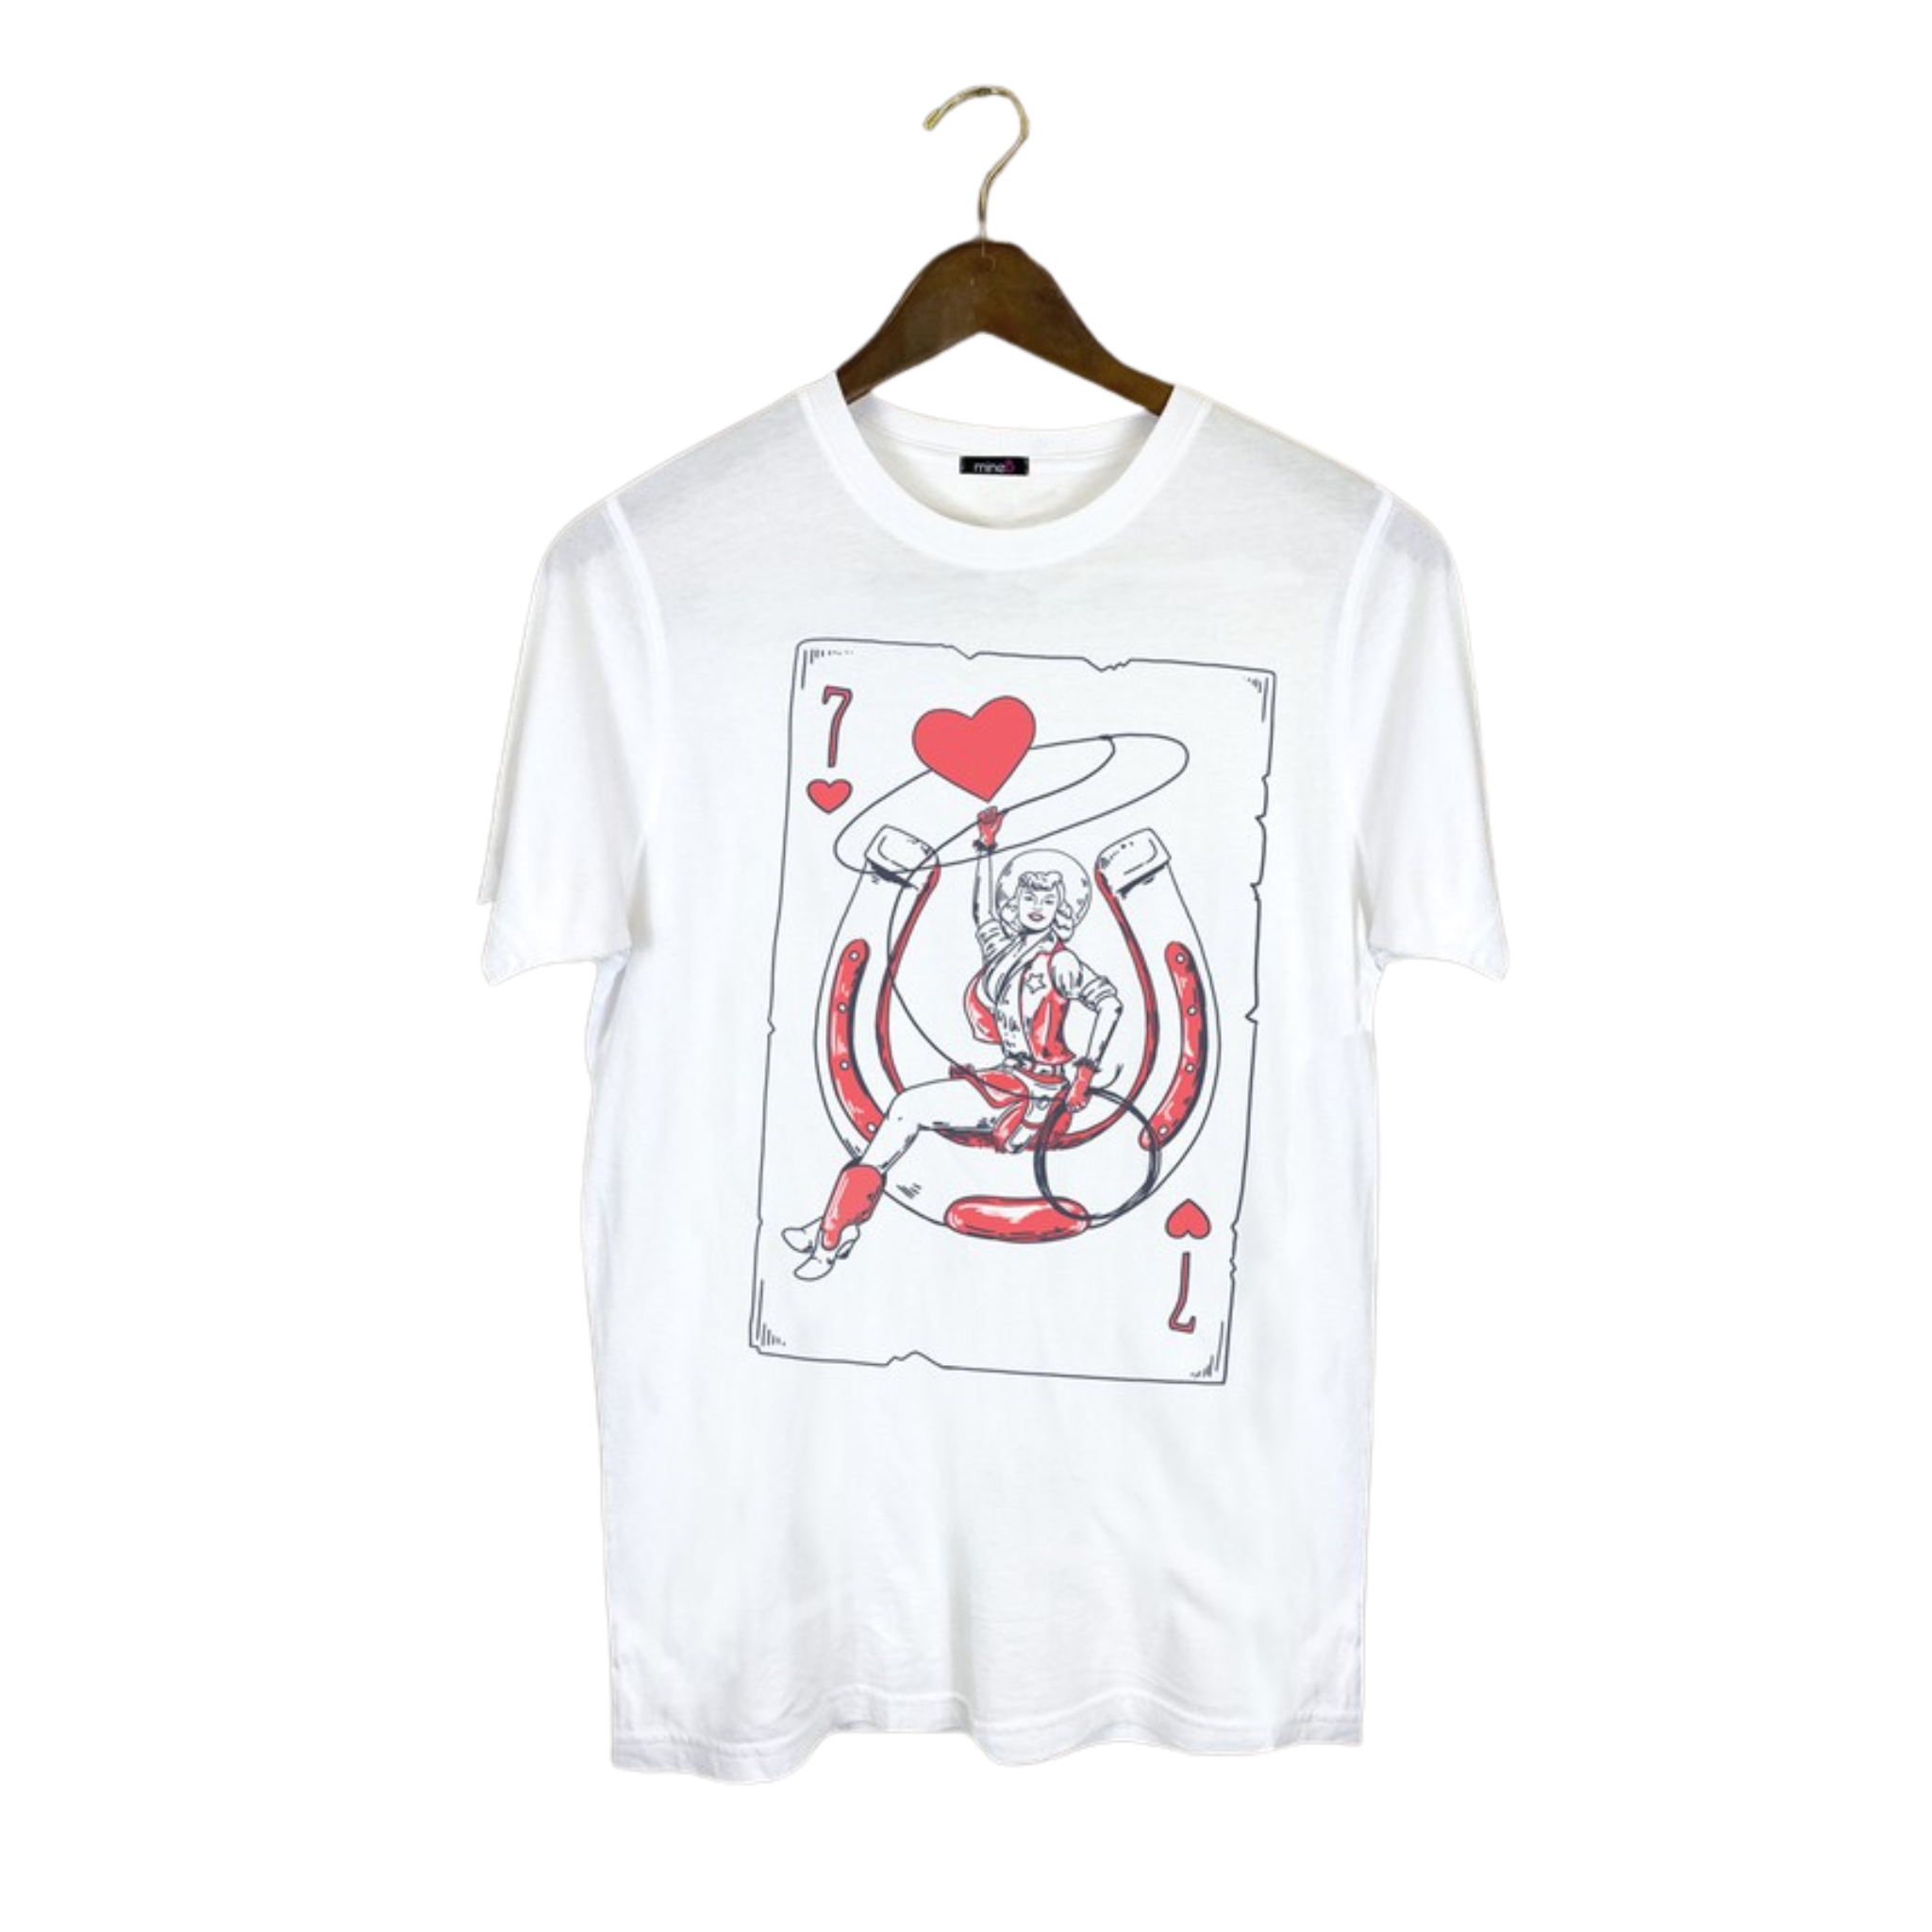 Lady Luck Graphic Tee